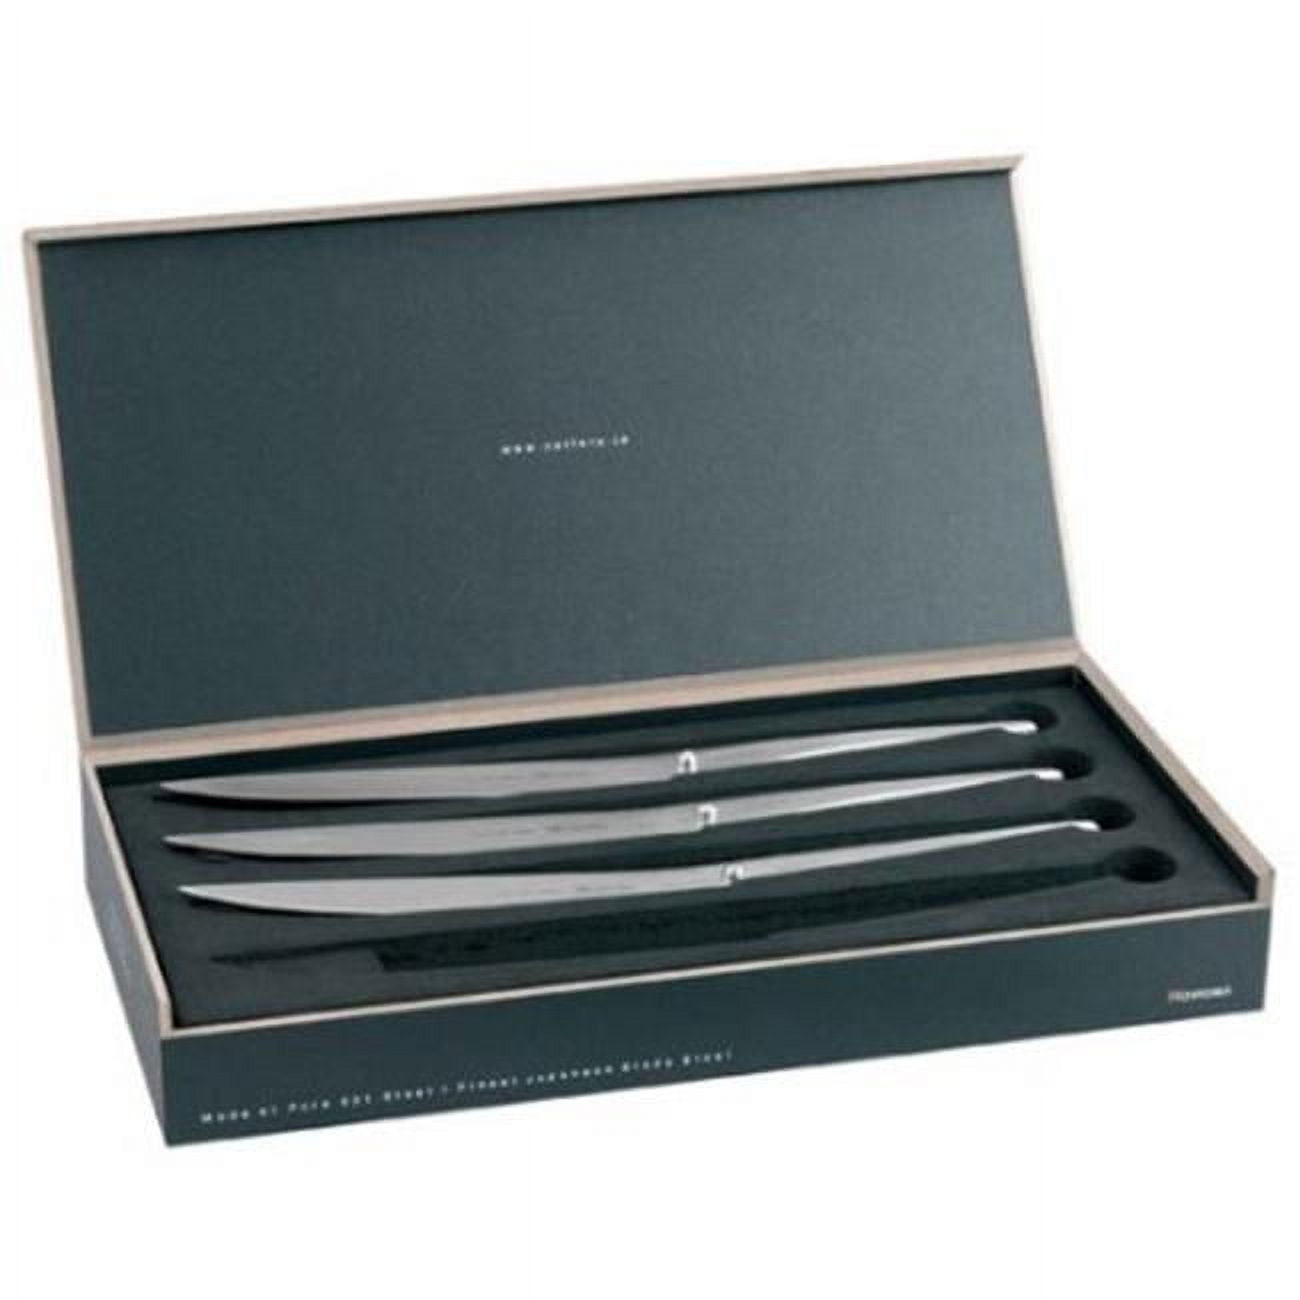 Type 301 Designed By F.a. Porsche 5 In. Steak Knives Set Of 4 Pieces